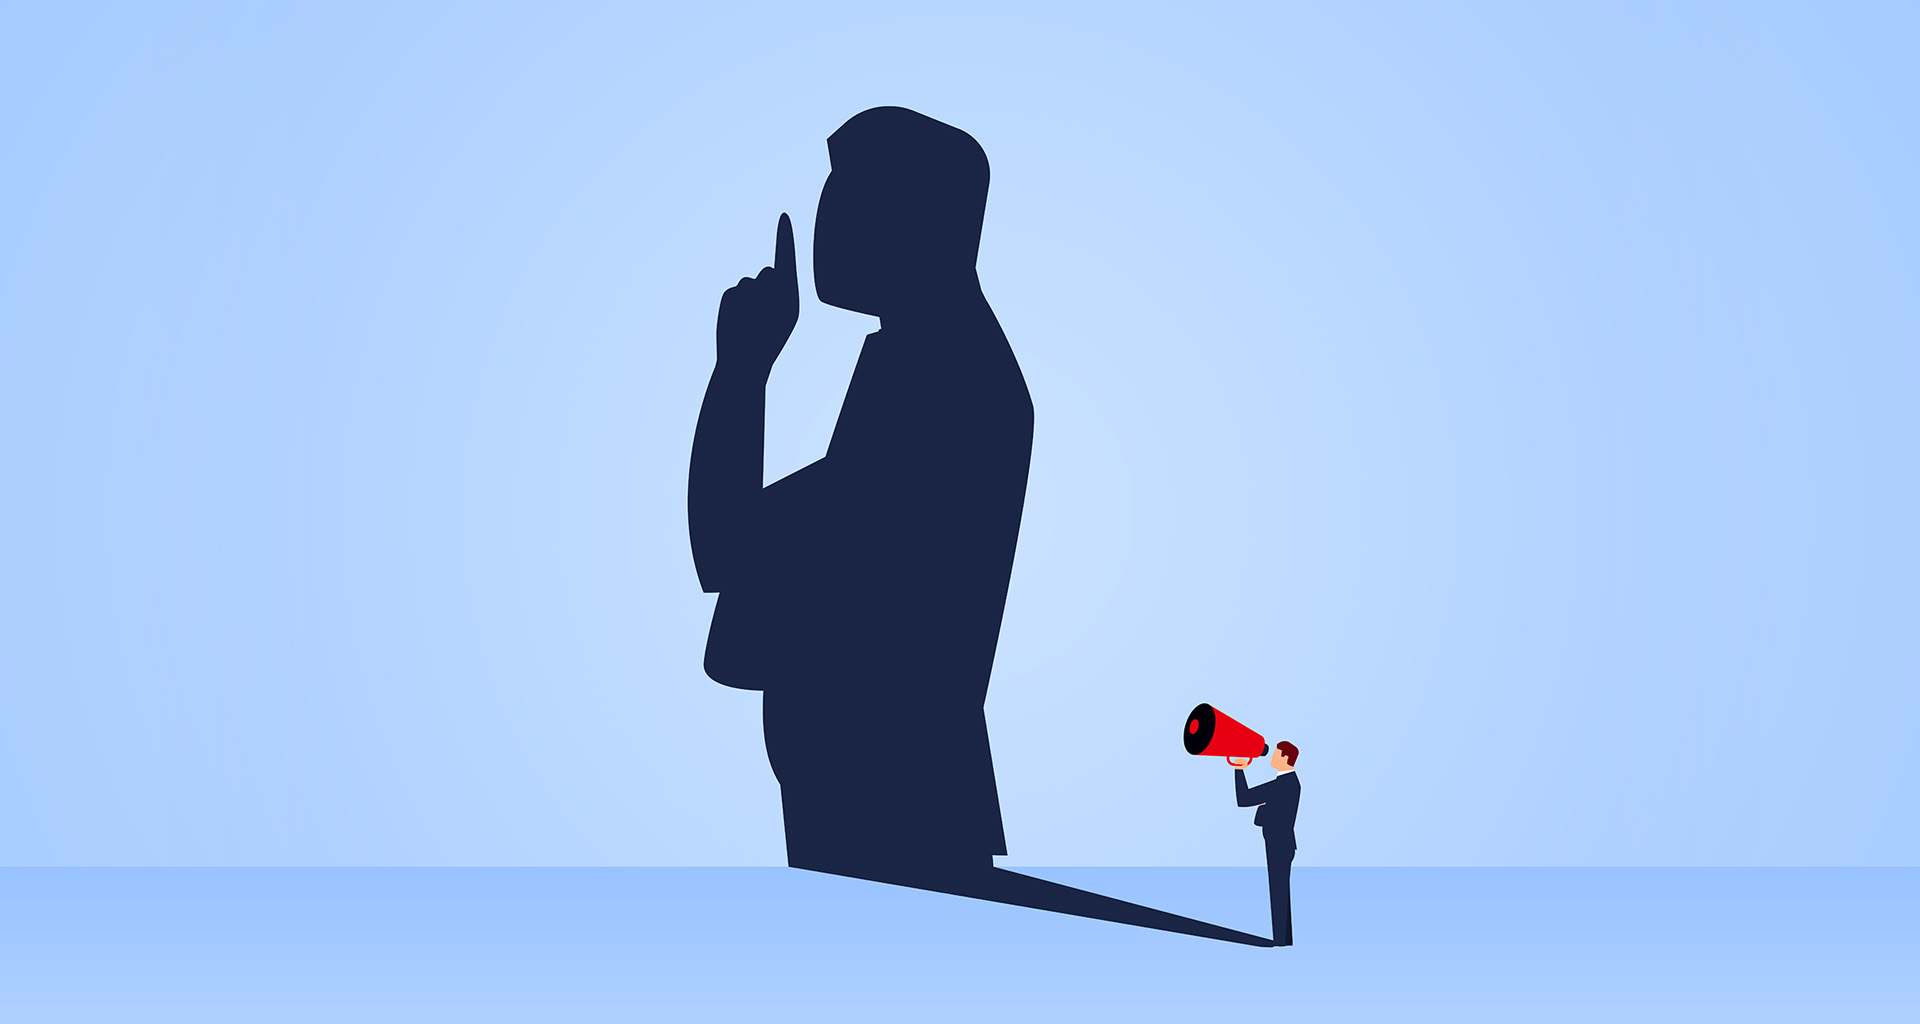 An illustration of a man with megaphone casting shadow of a man holding his finger in front of his mouth.